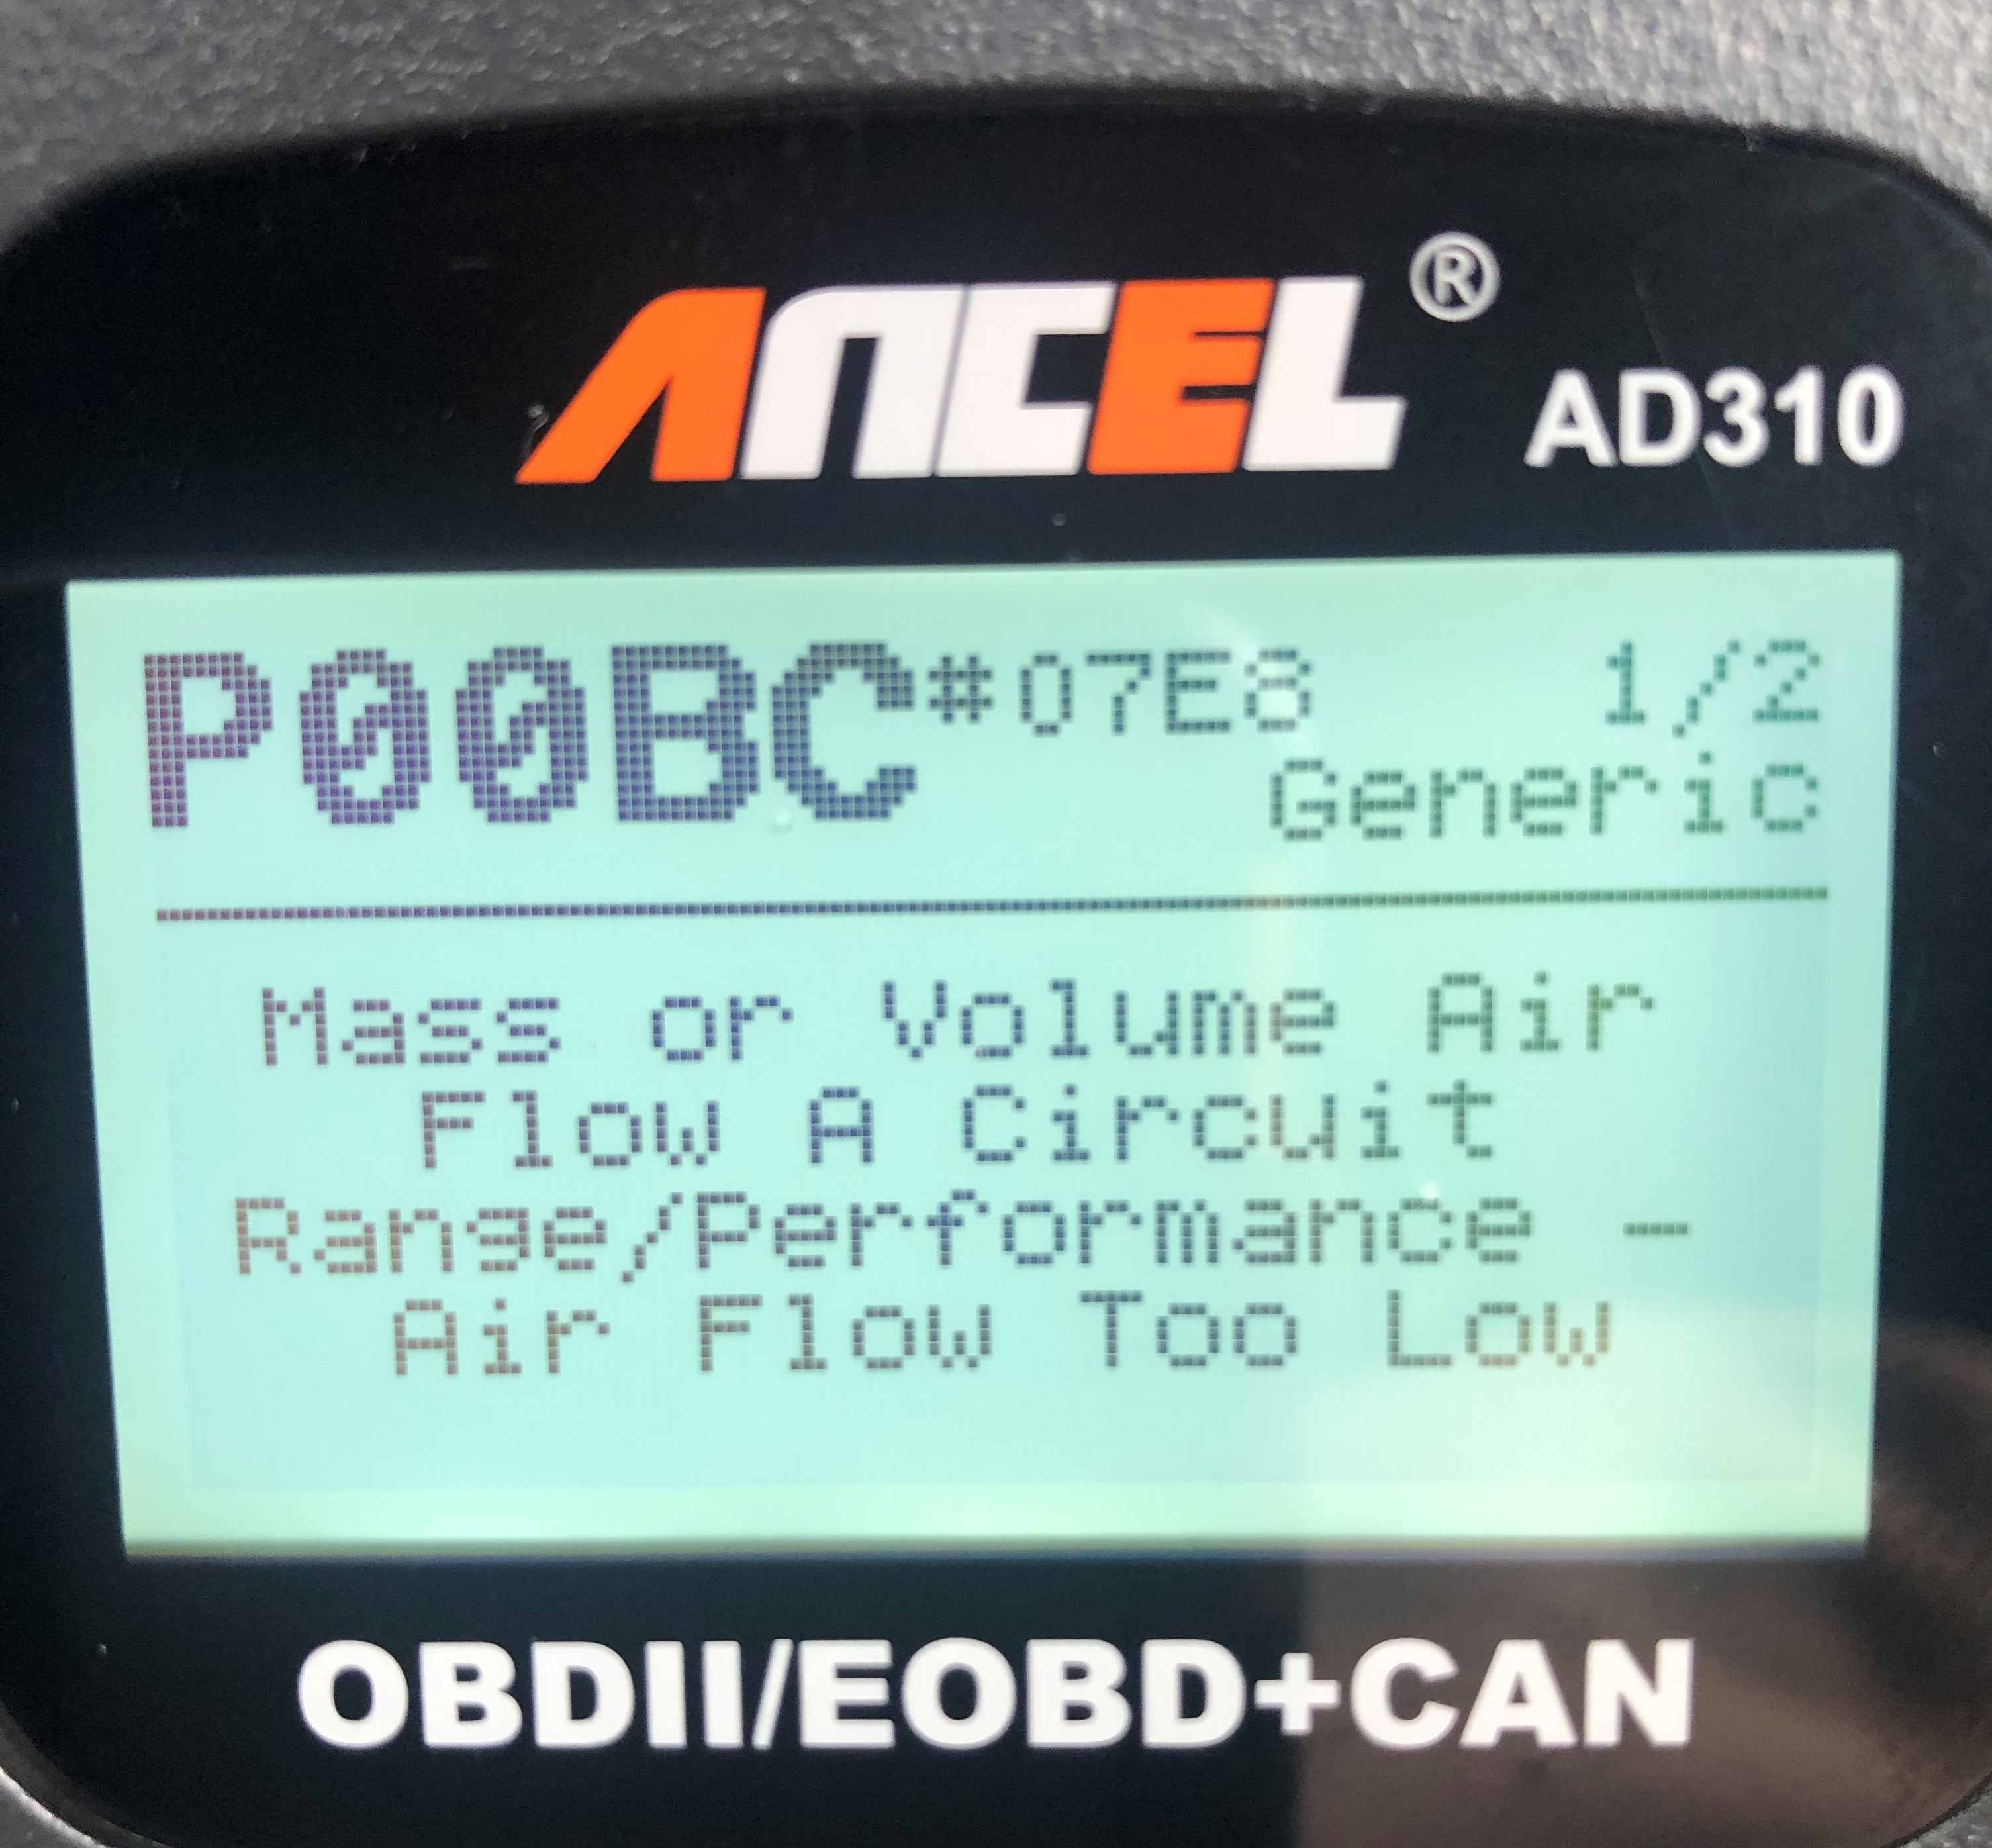 Output from an OBD-II scanner